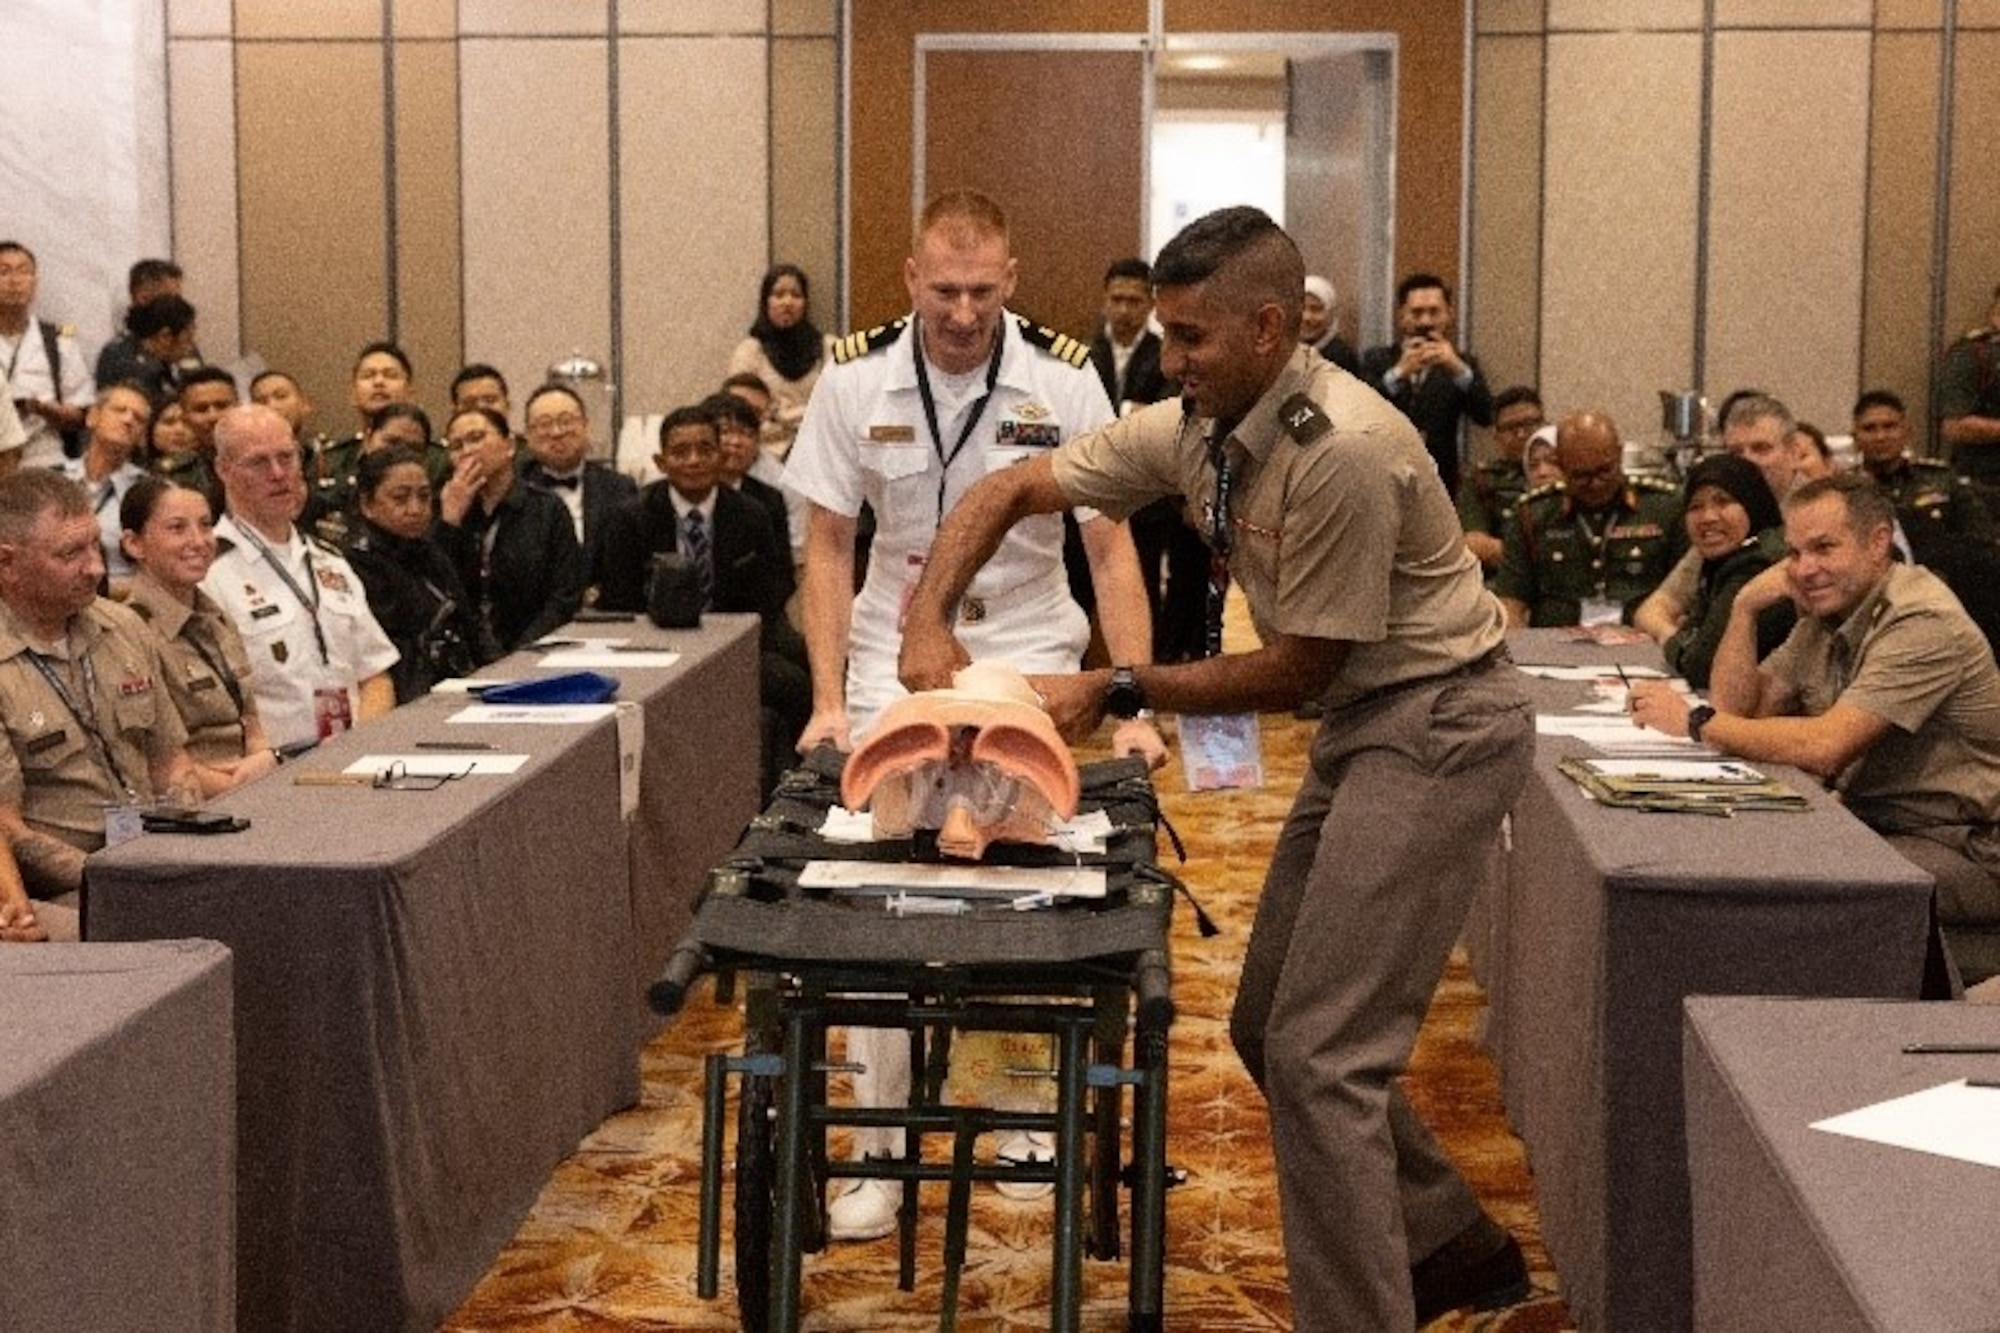 Image of service members conducting training.